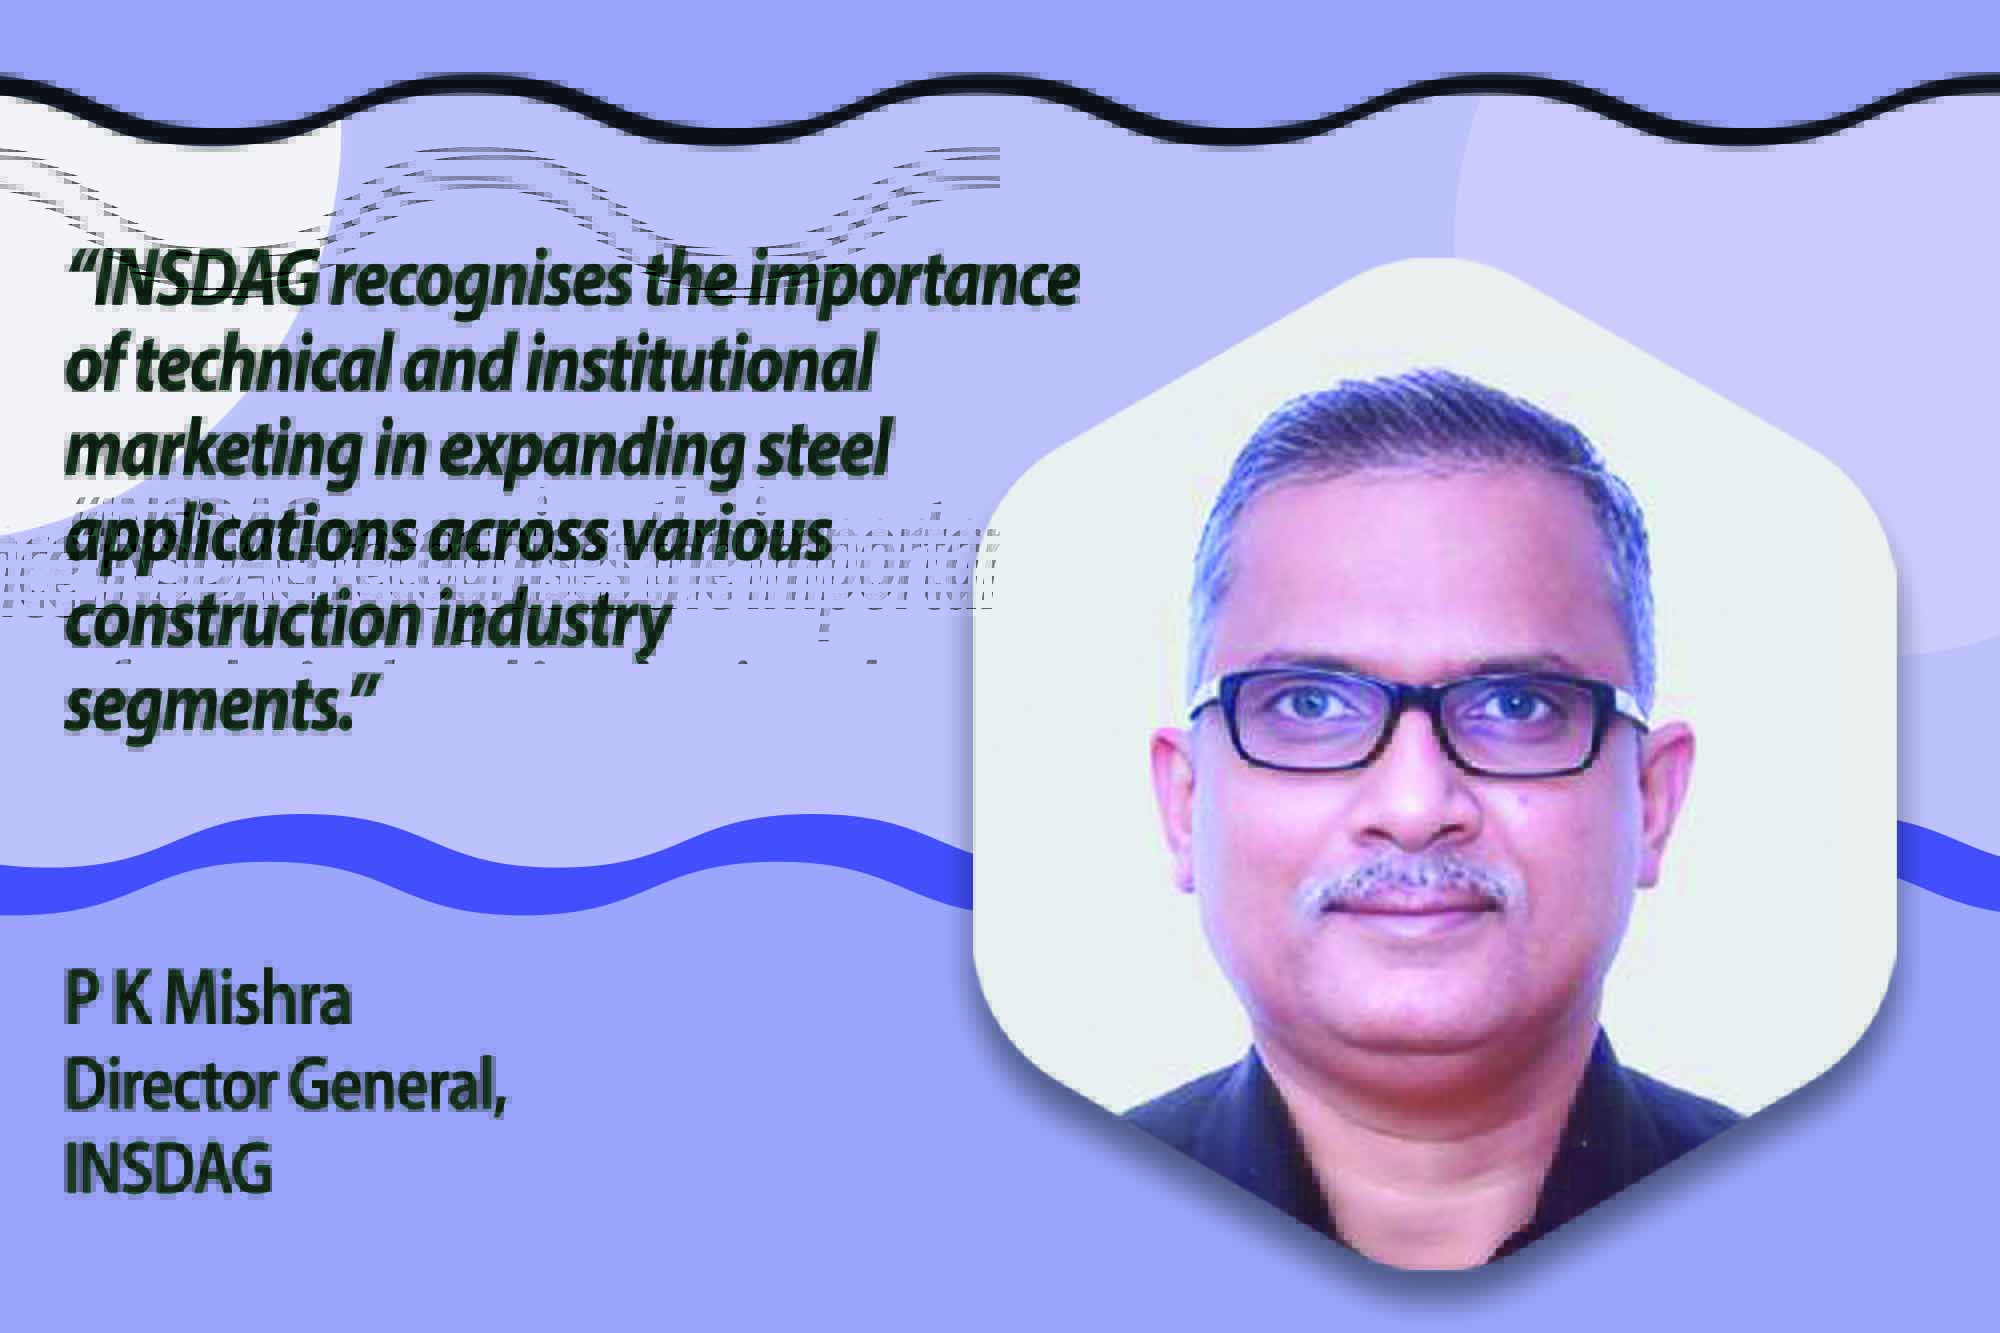 Established in 1999 by the Government of India (Ministry of Steel) and major steel producers, the Institute for Steel Development & Growth (INSDAG) is a not-for-profit organisation dedicated to advancing the steel industry in India. Inspired by the Steel Construction Institute (SCI) in the UK, INSDAG's primary objective is to promote the consumption of steel, particularly in construction and infrastructure development.